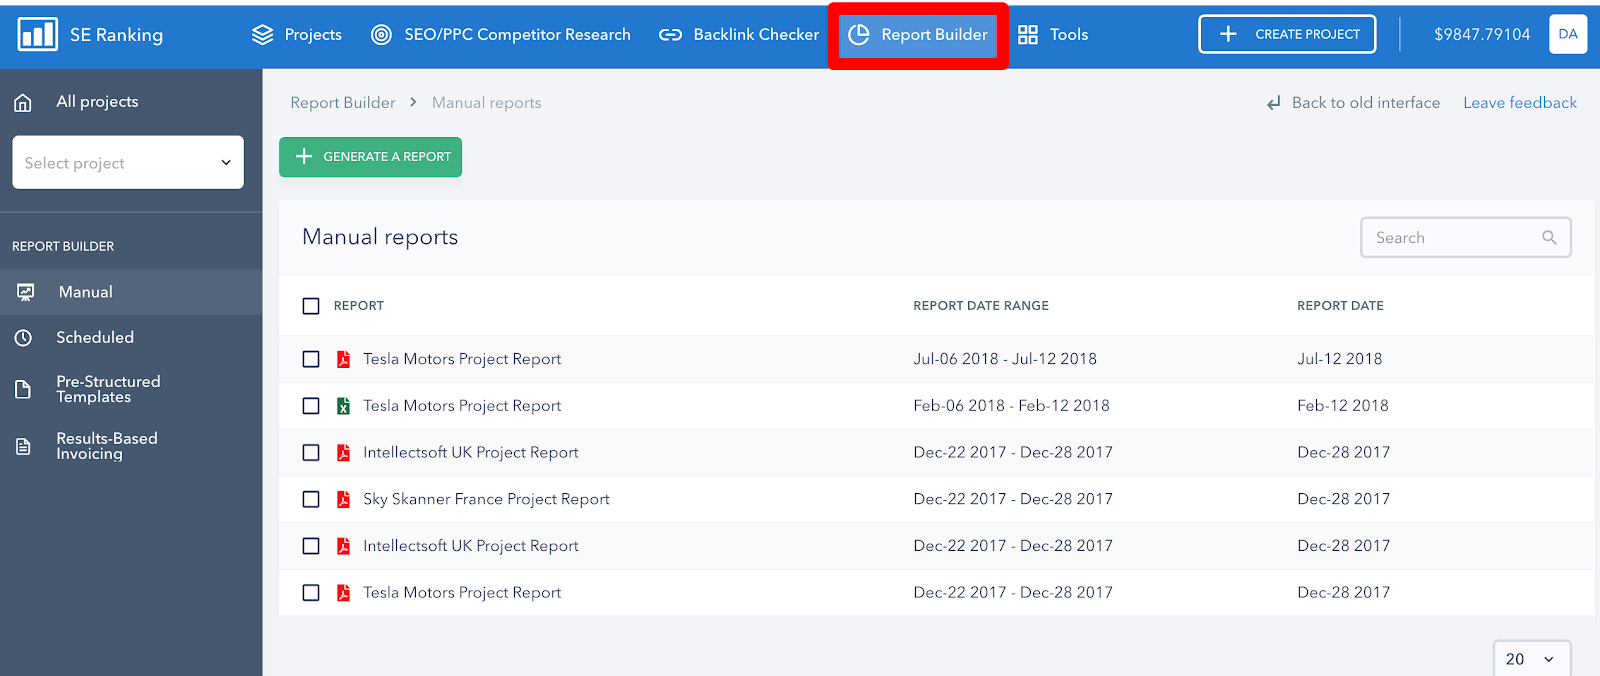 Finding the Report Builder in SE Ranking